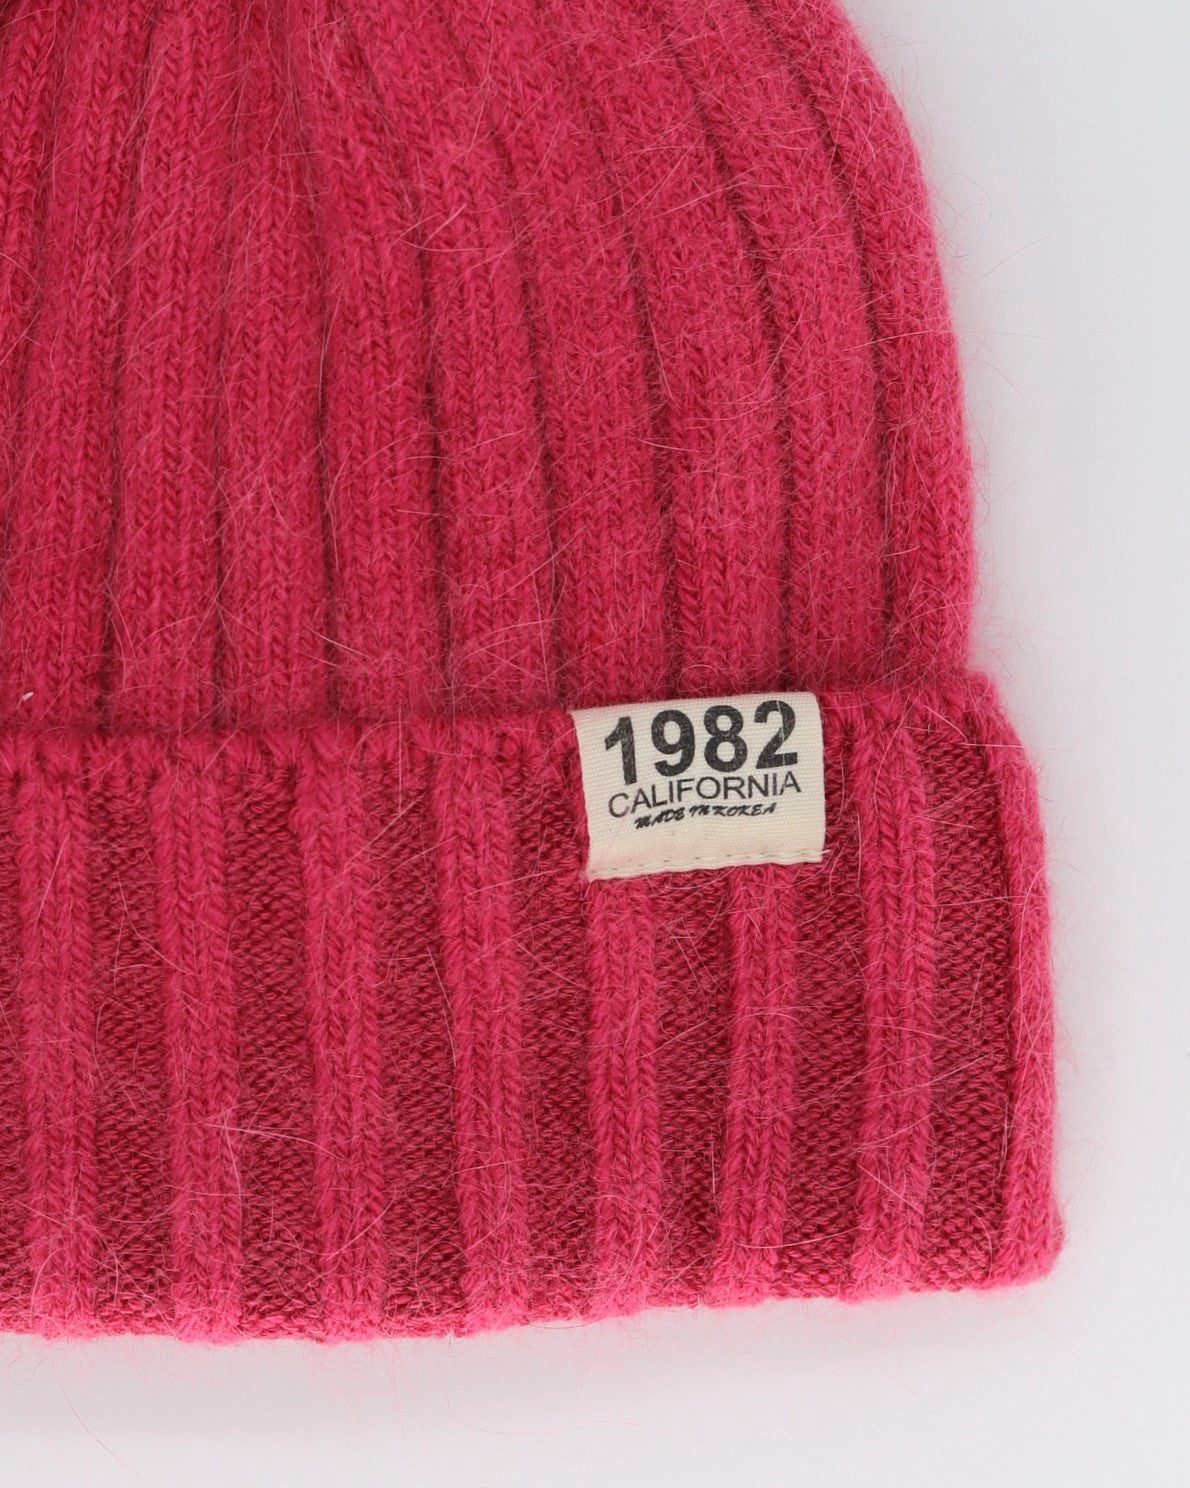 This Beanie is a finest hat with a classic silhouette from Villanella. A luxurious accessory for women made from the softest natural wool, cashmere and viscose for extreme comfort and warmth. It is made in a trendy raspberry pink color accompanied by an elegant pin. This product is sourced and manufactured in Poland.